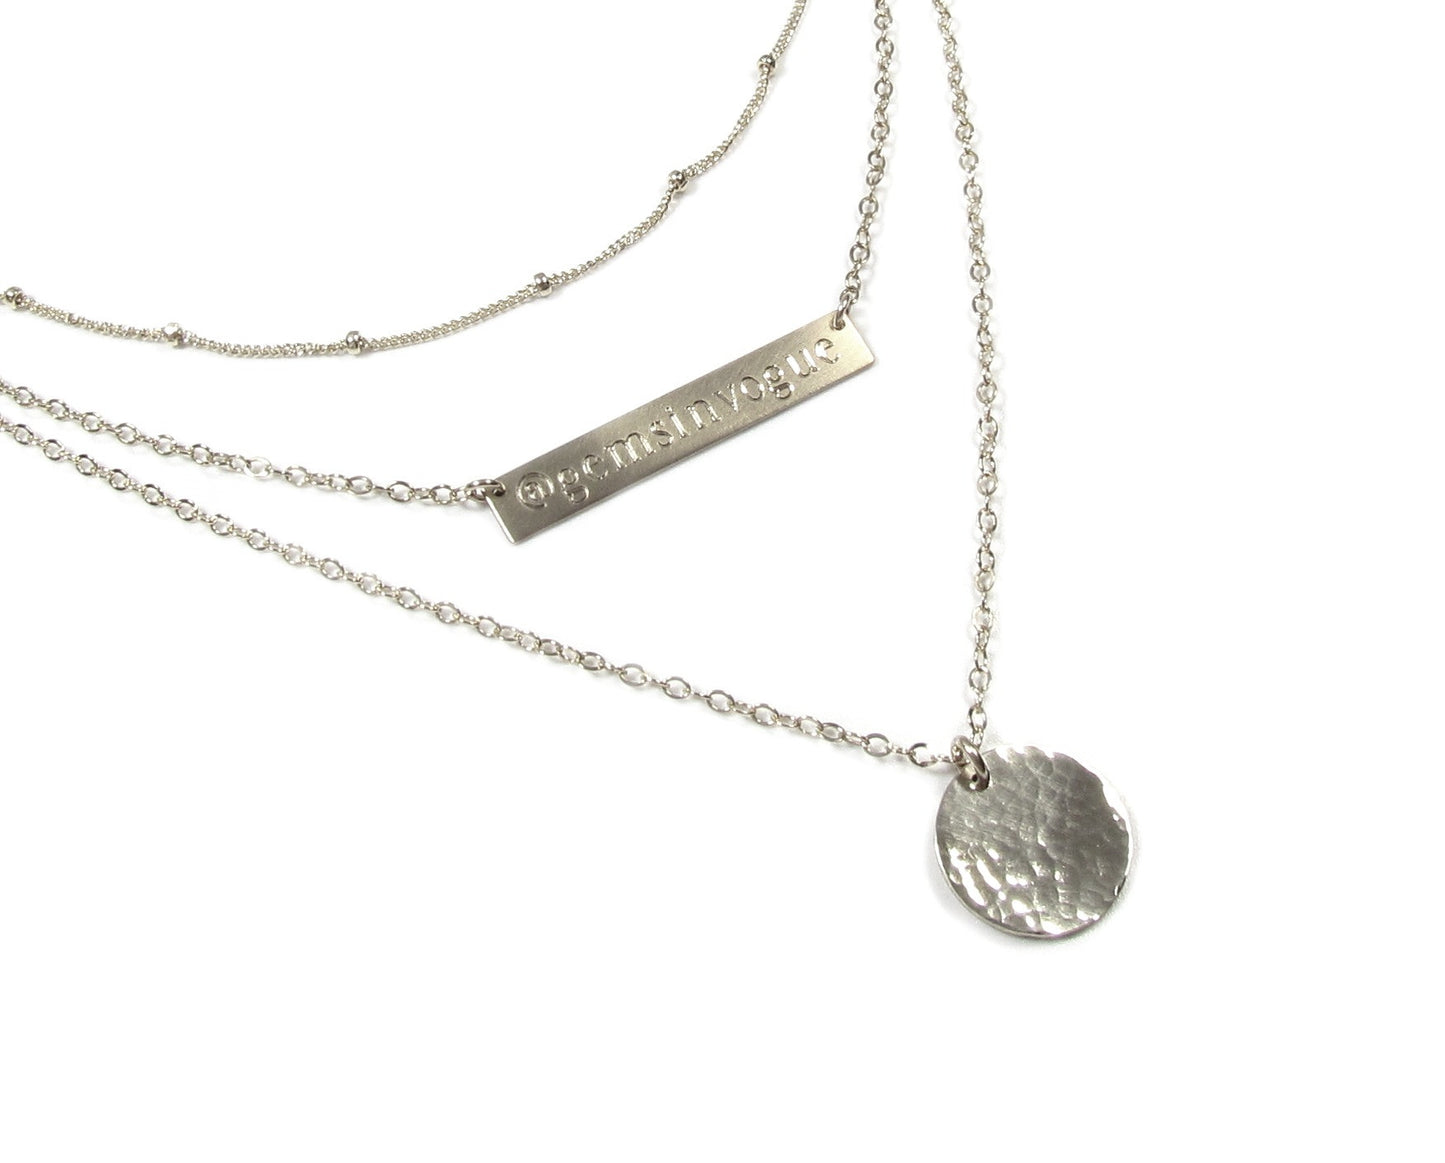 Set of 3 Layering Necklaces with Personalized Engraved Bar Necklace